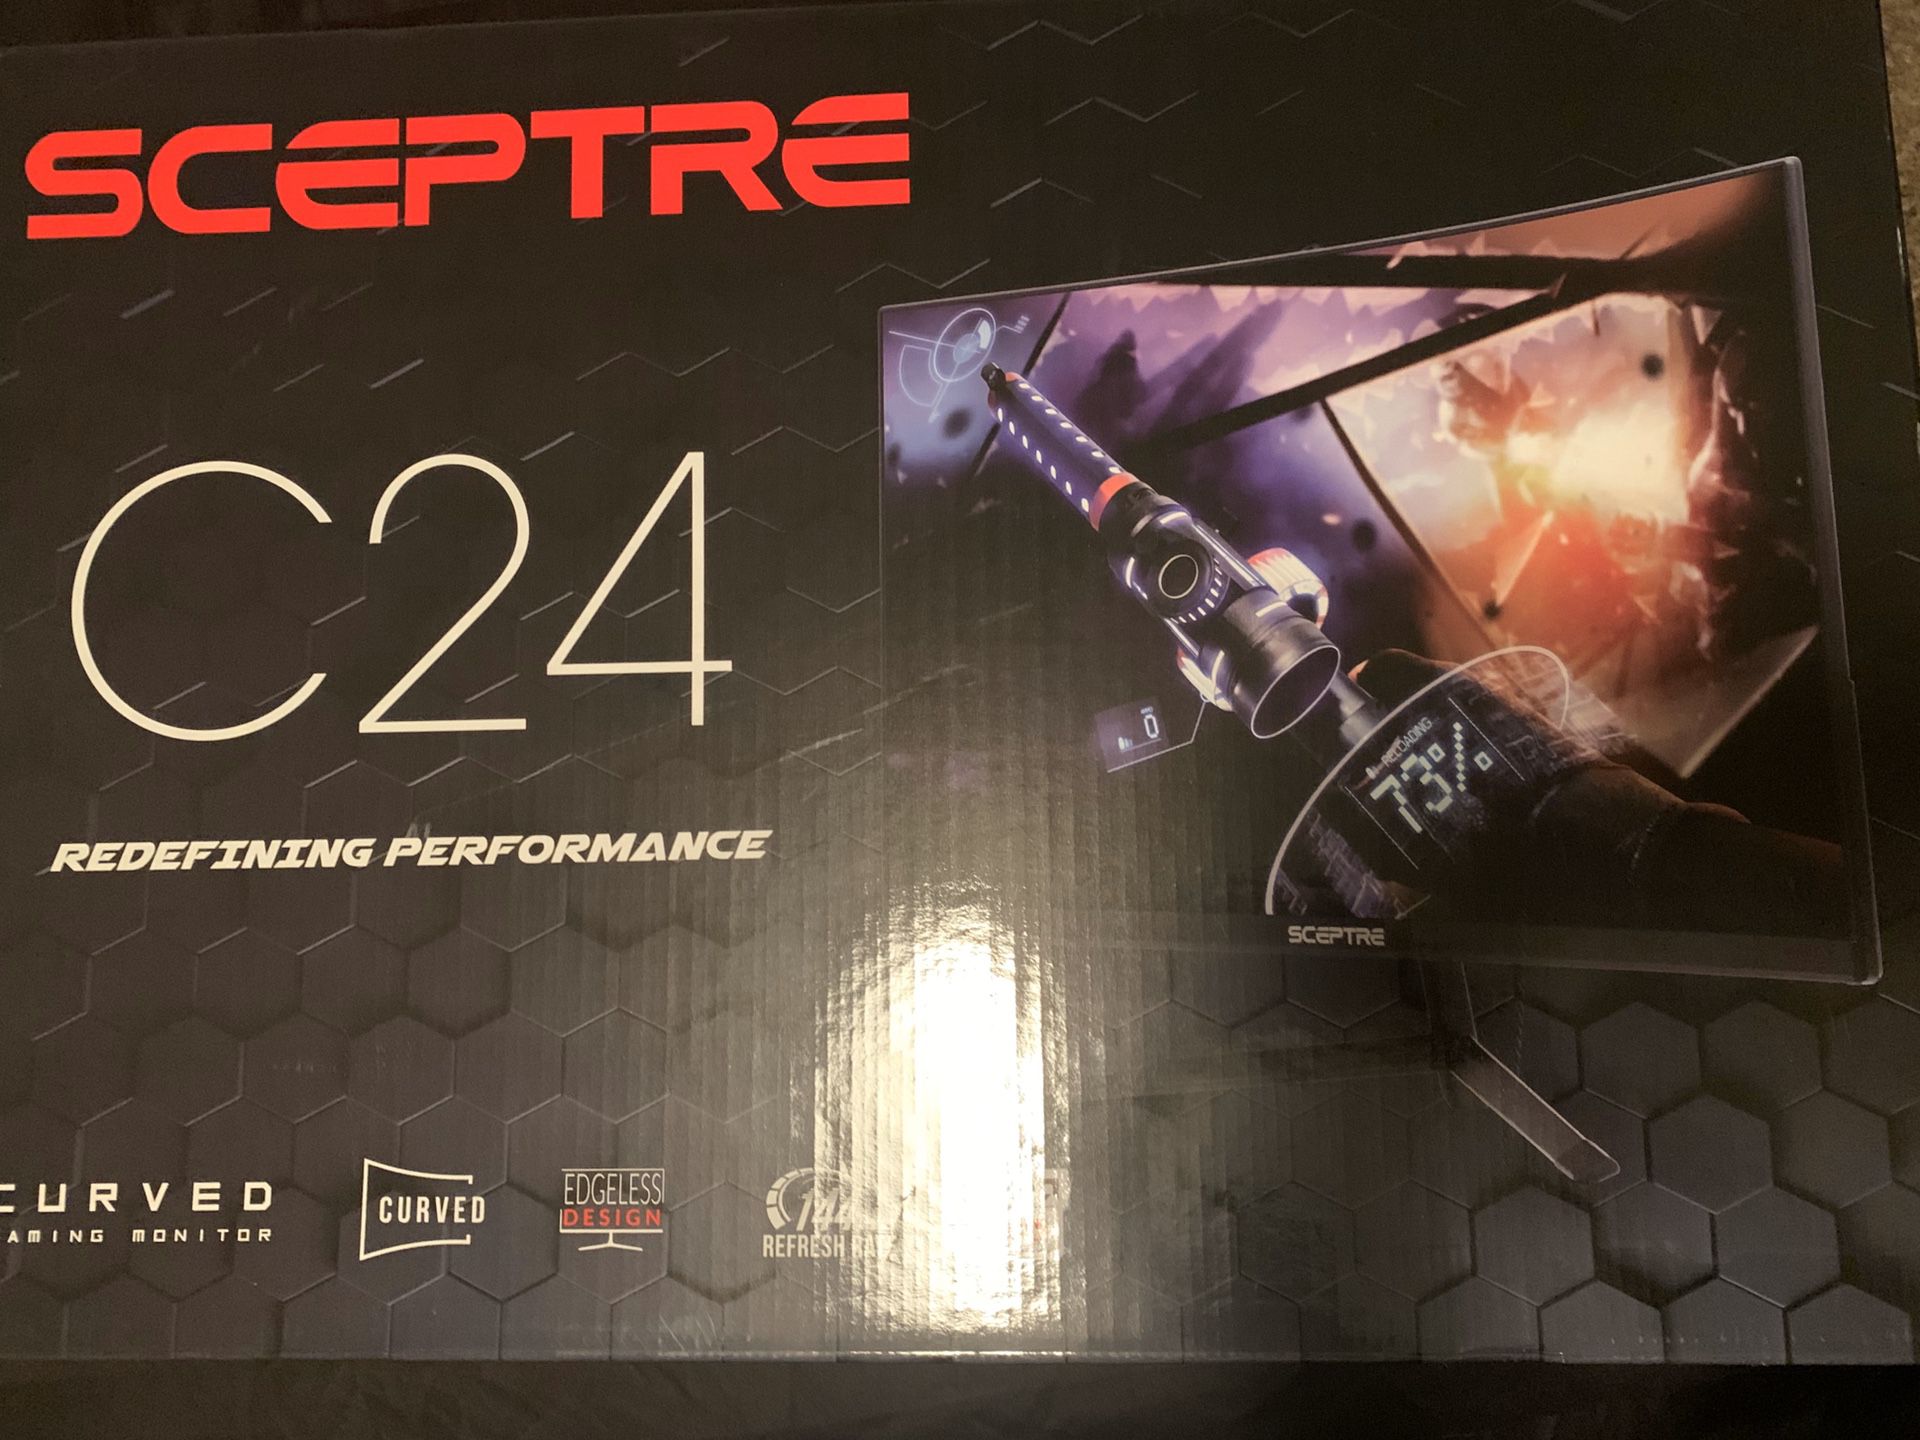 Sceptre 24 Inch curved monitor 144hz 1080p